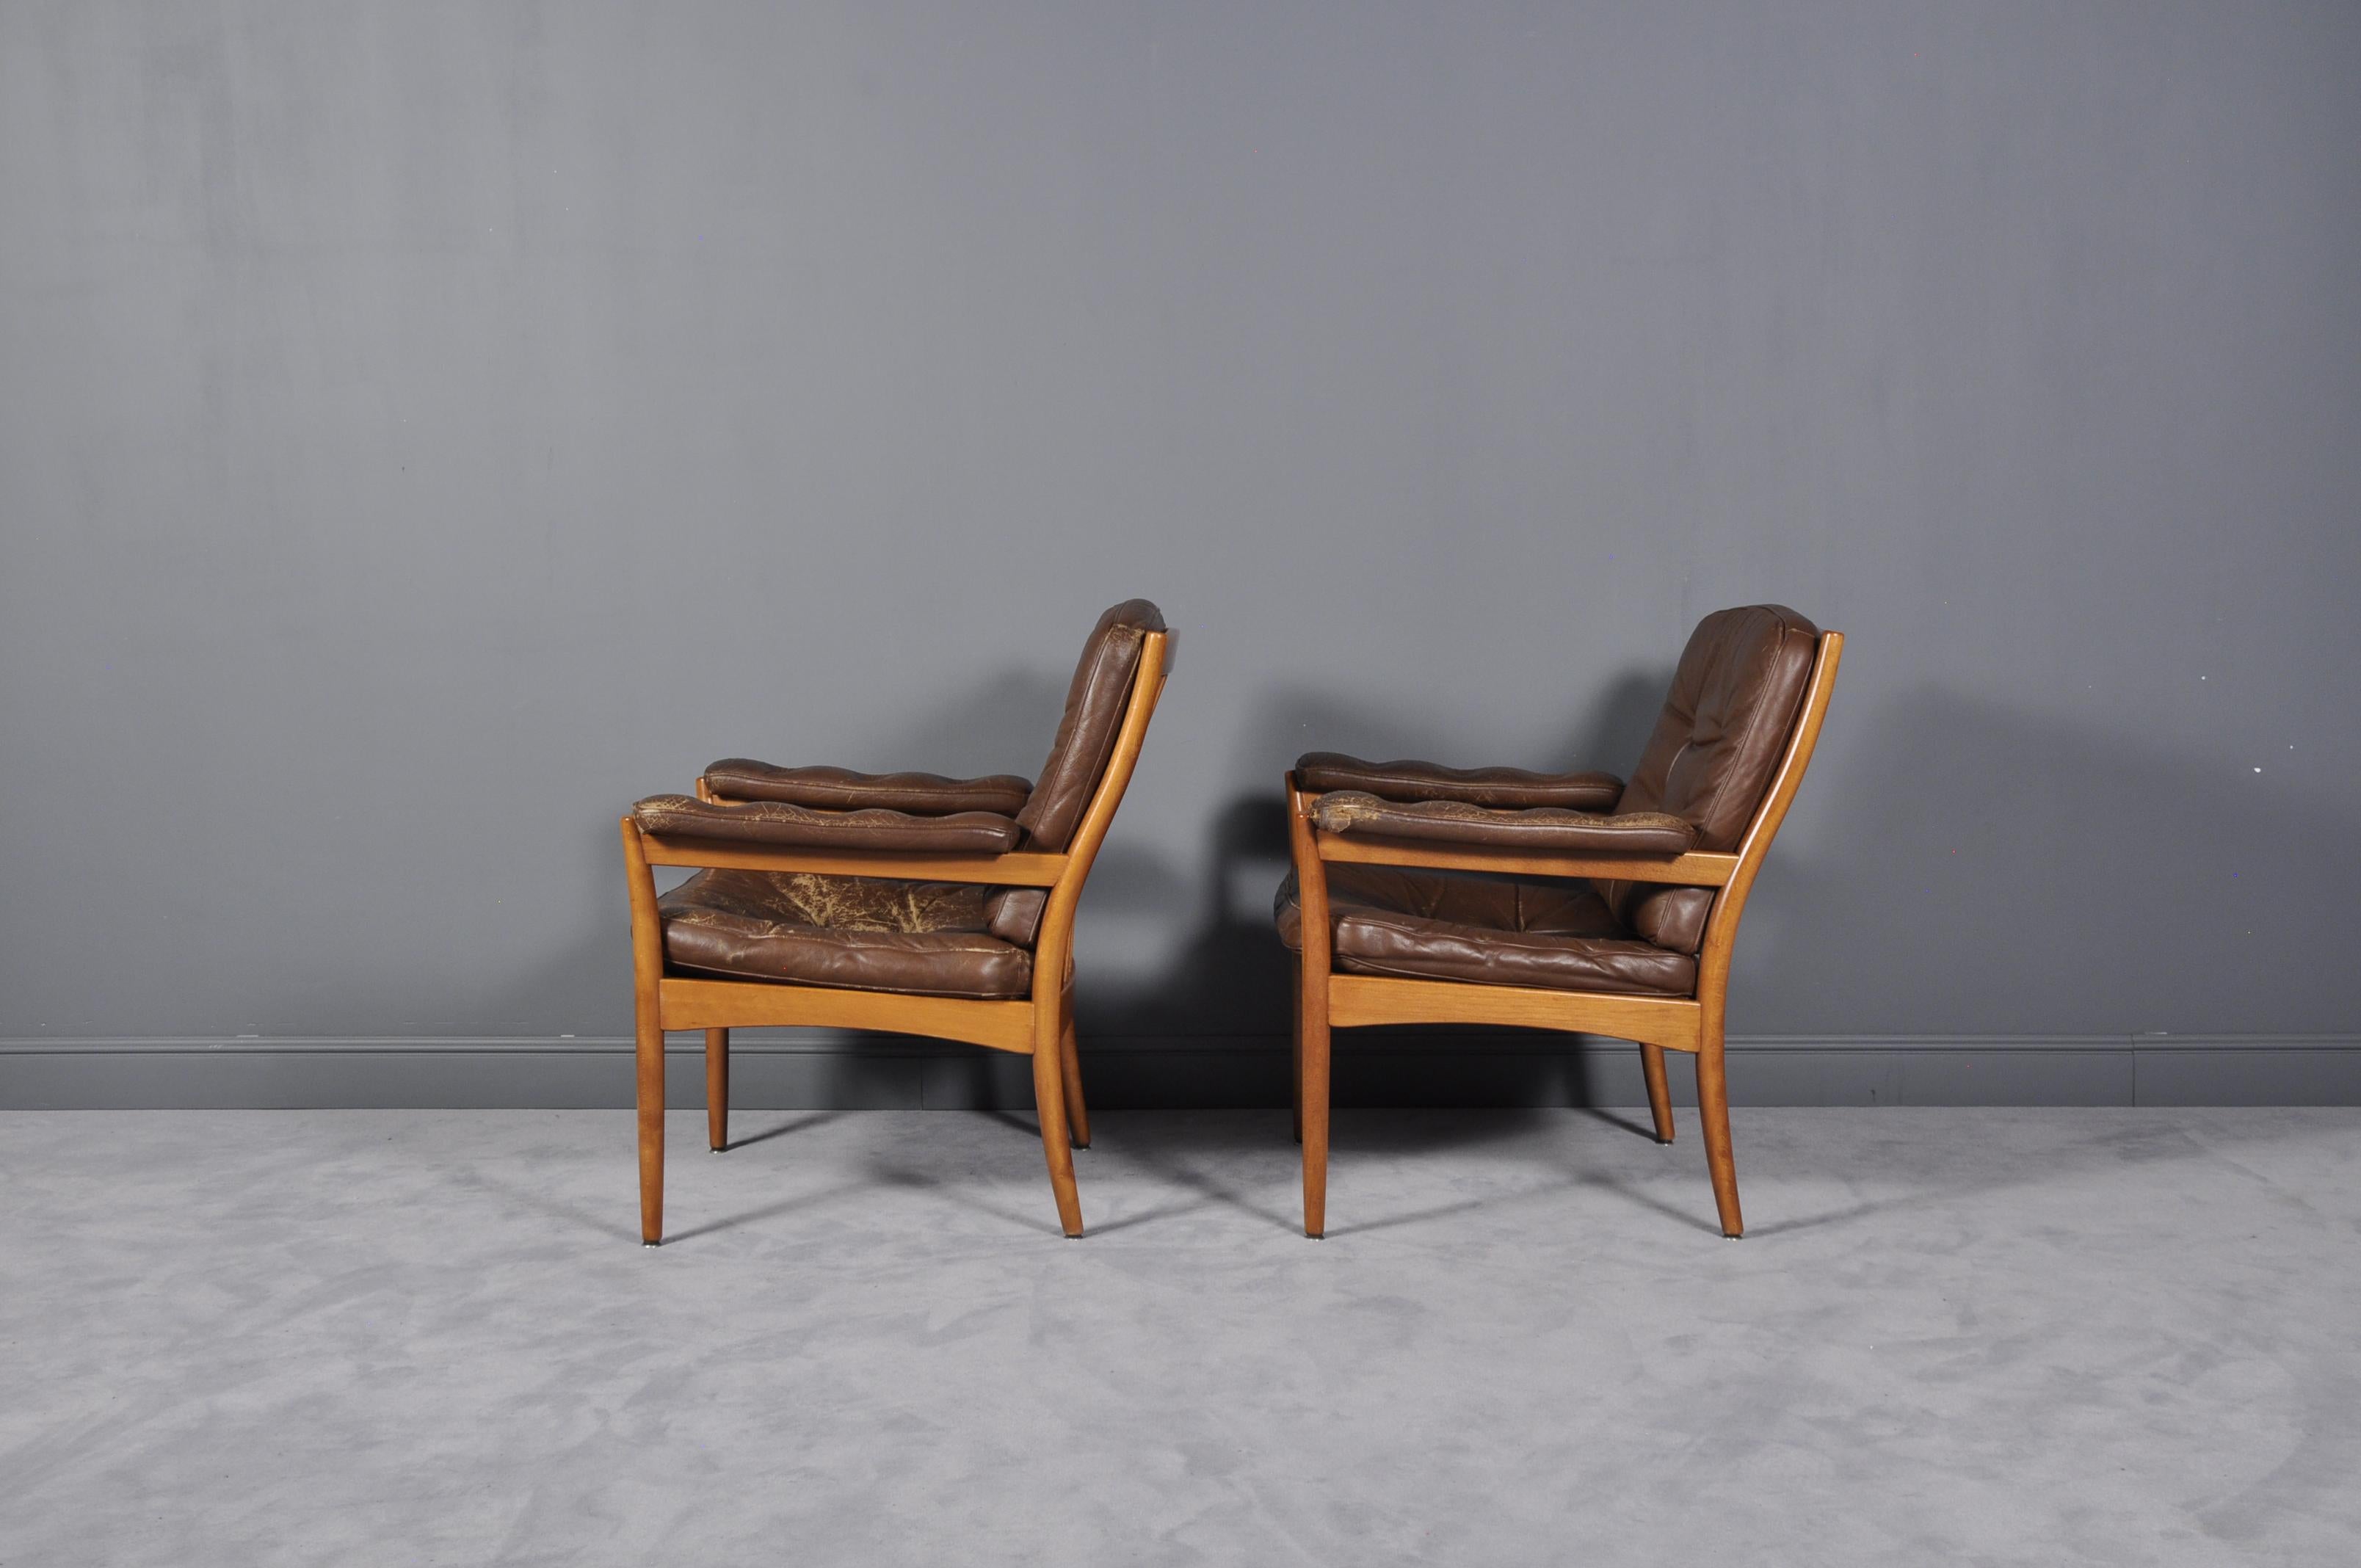 This pair of model Carmen easy chairs was produced by Göte Möbler, a Swedish manufacturer, and dates to the 1970s. The comfortable pieces feature hardwood frames and soft brown leather with buttoned cushions. They are labeled with the makers mark